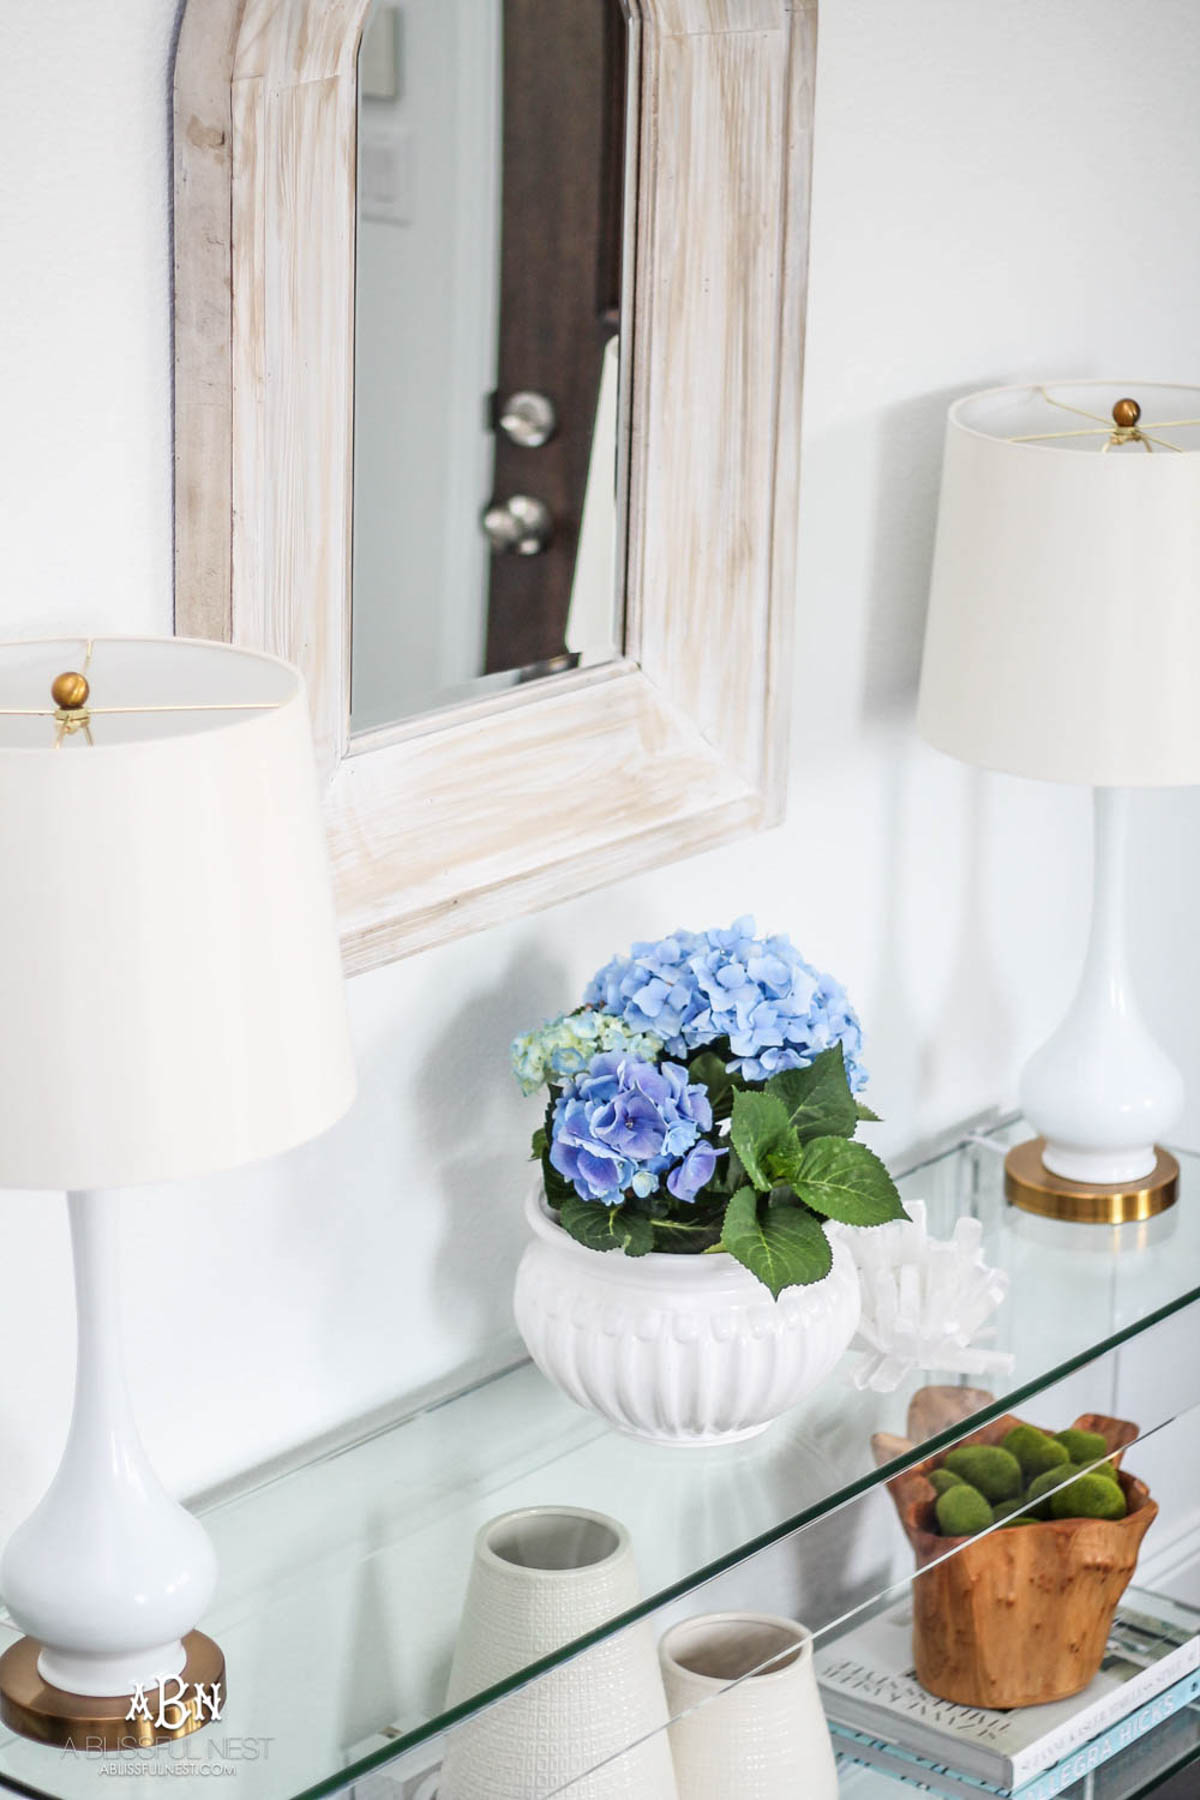 blue hydrangeas in a white ceramic pot next to two white table lamps on a console table.